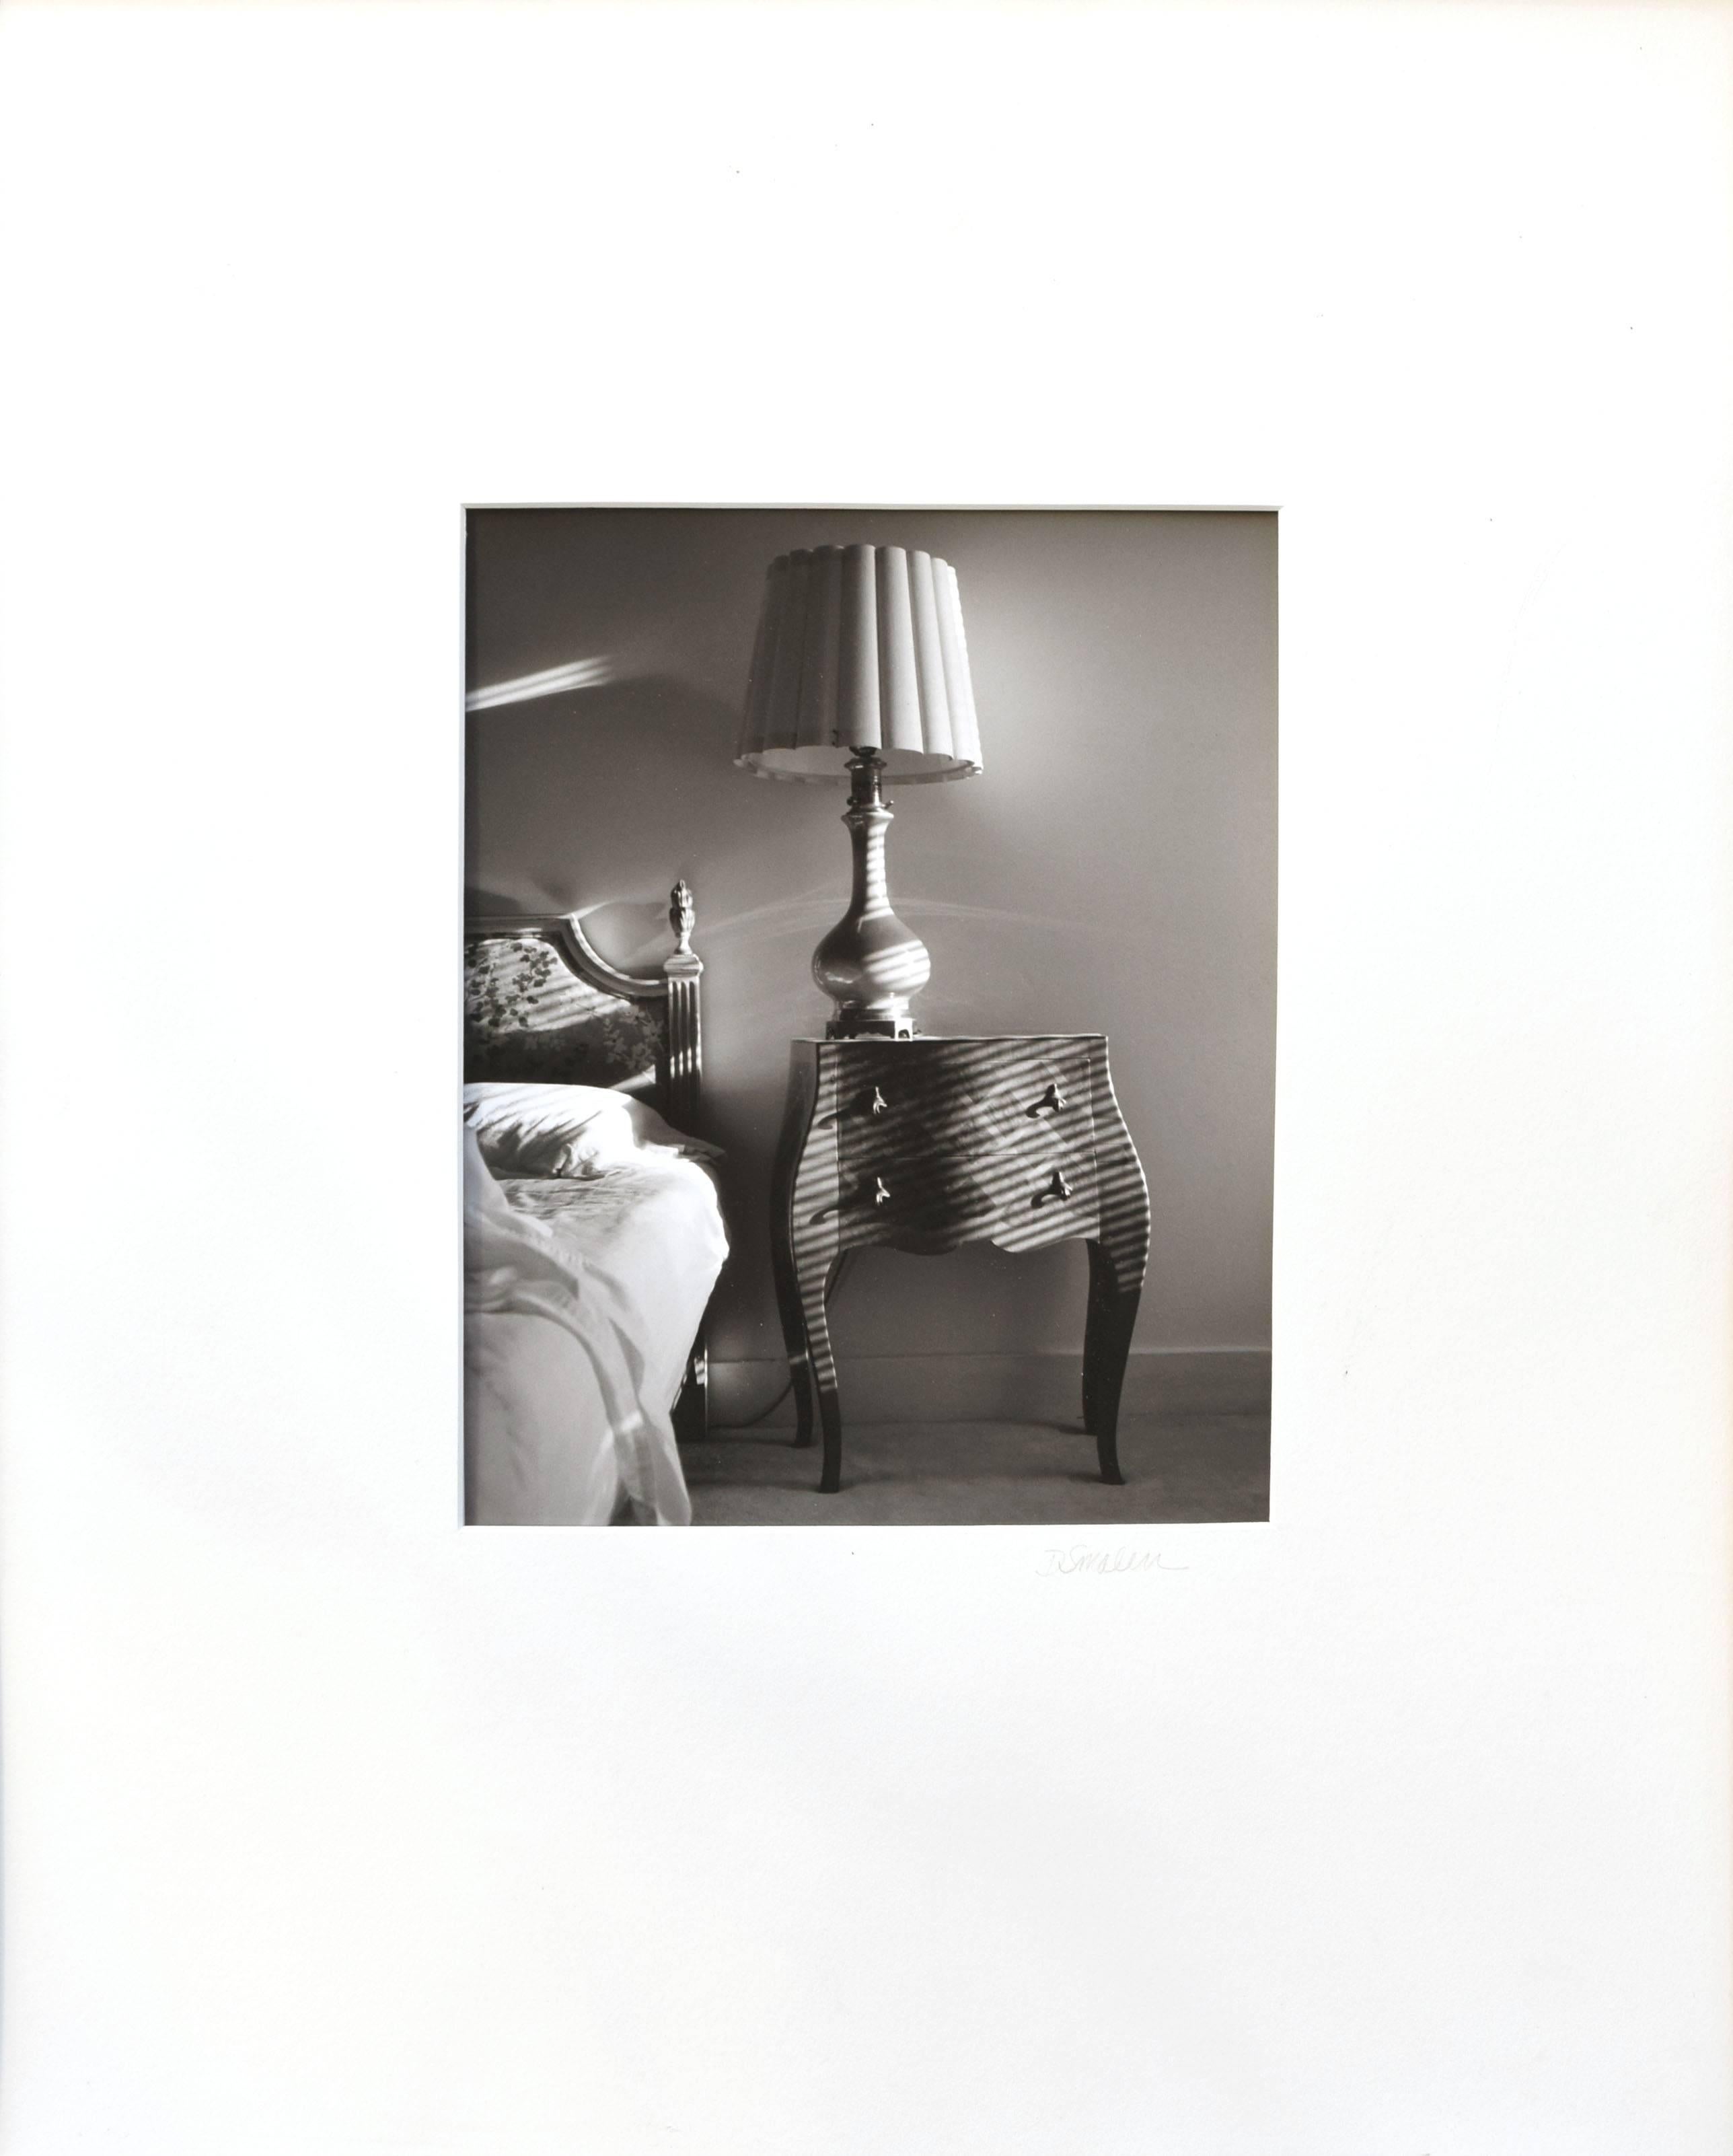 Table with Lamp - Black & White Bedroom Interior Photograph